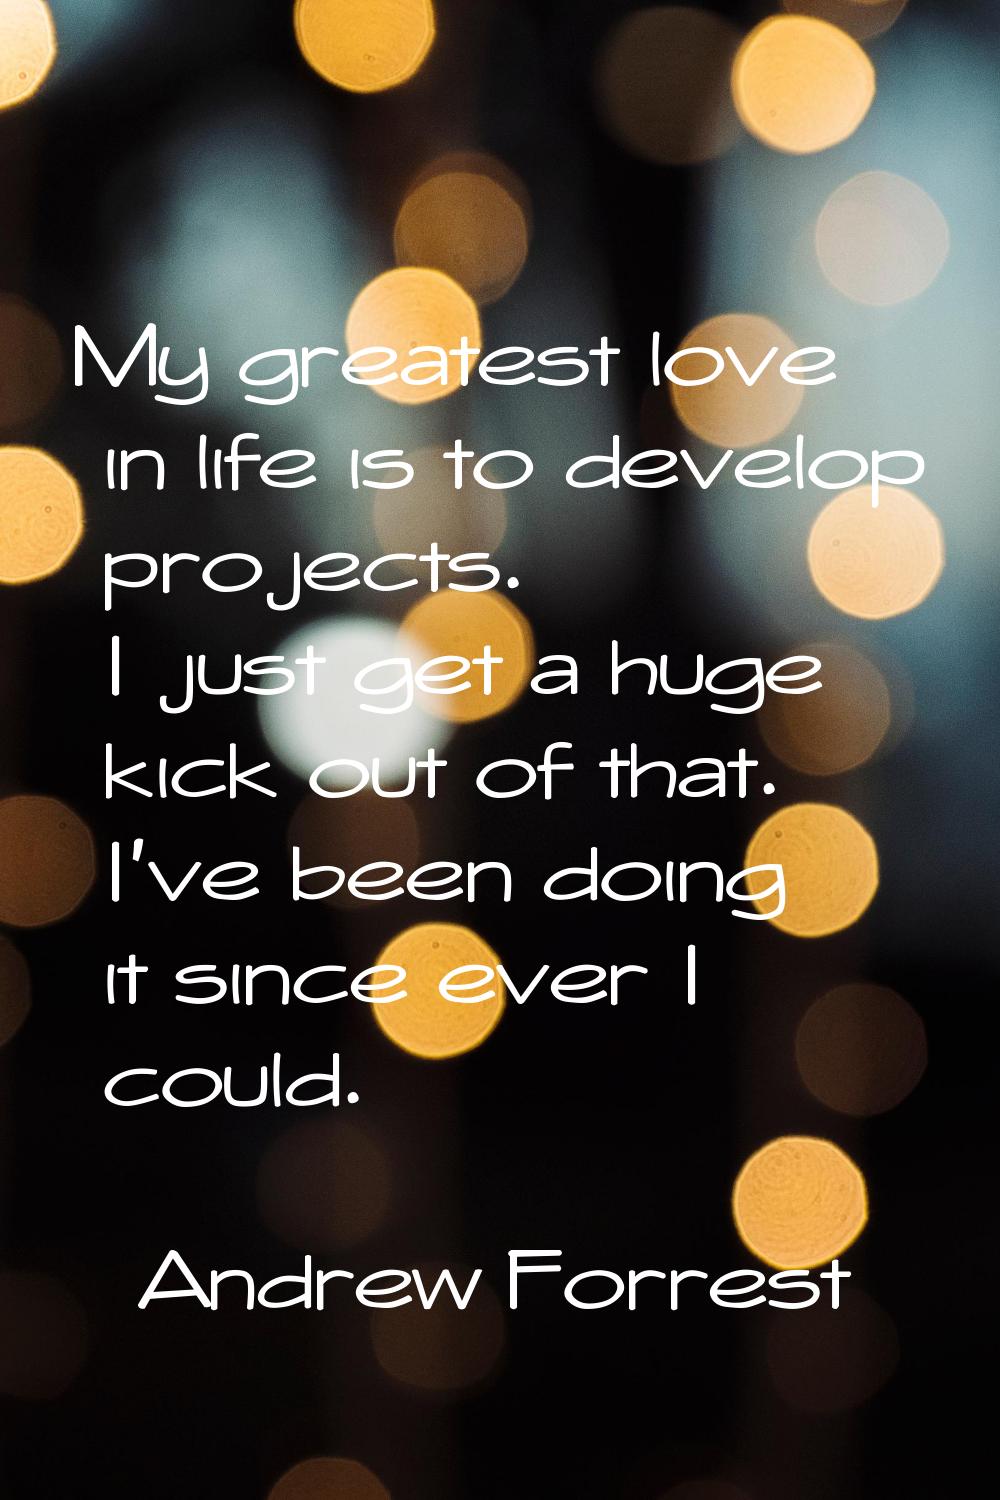 My greatest love in life is to develop projects. I just get a huge kick out of that. I've been doin